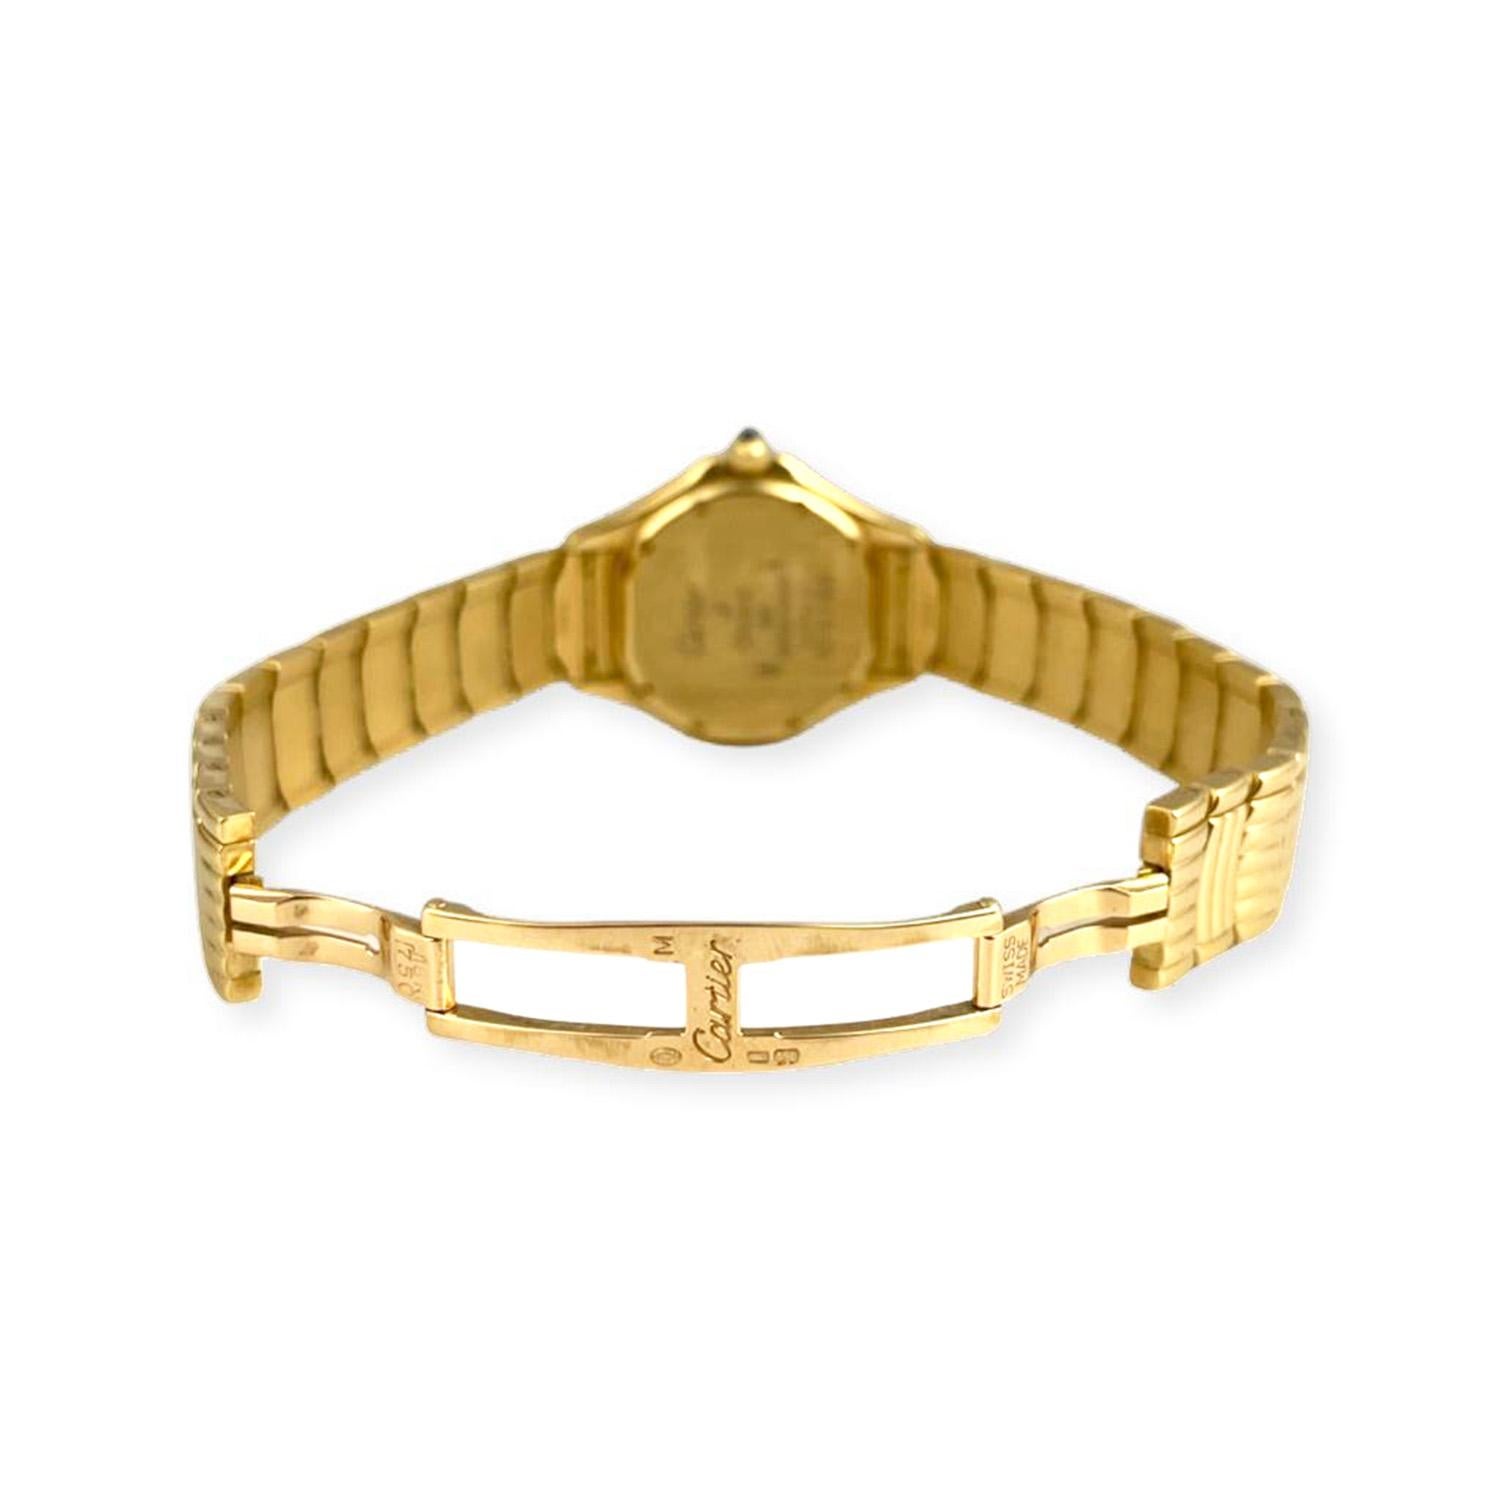 Modern Cartier Cougar Panthere in 18k Yellow Gold Watch